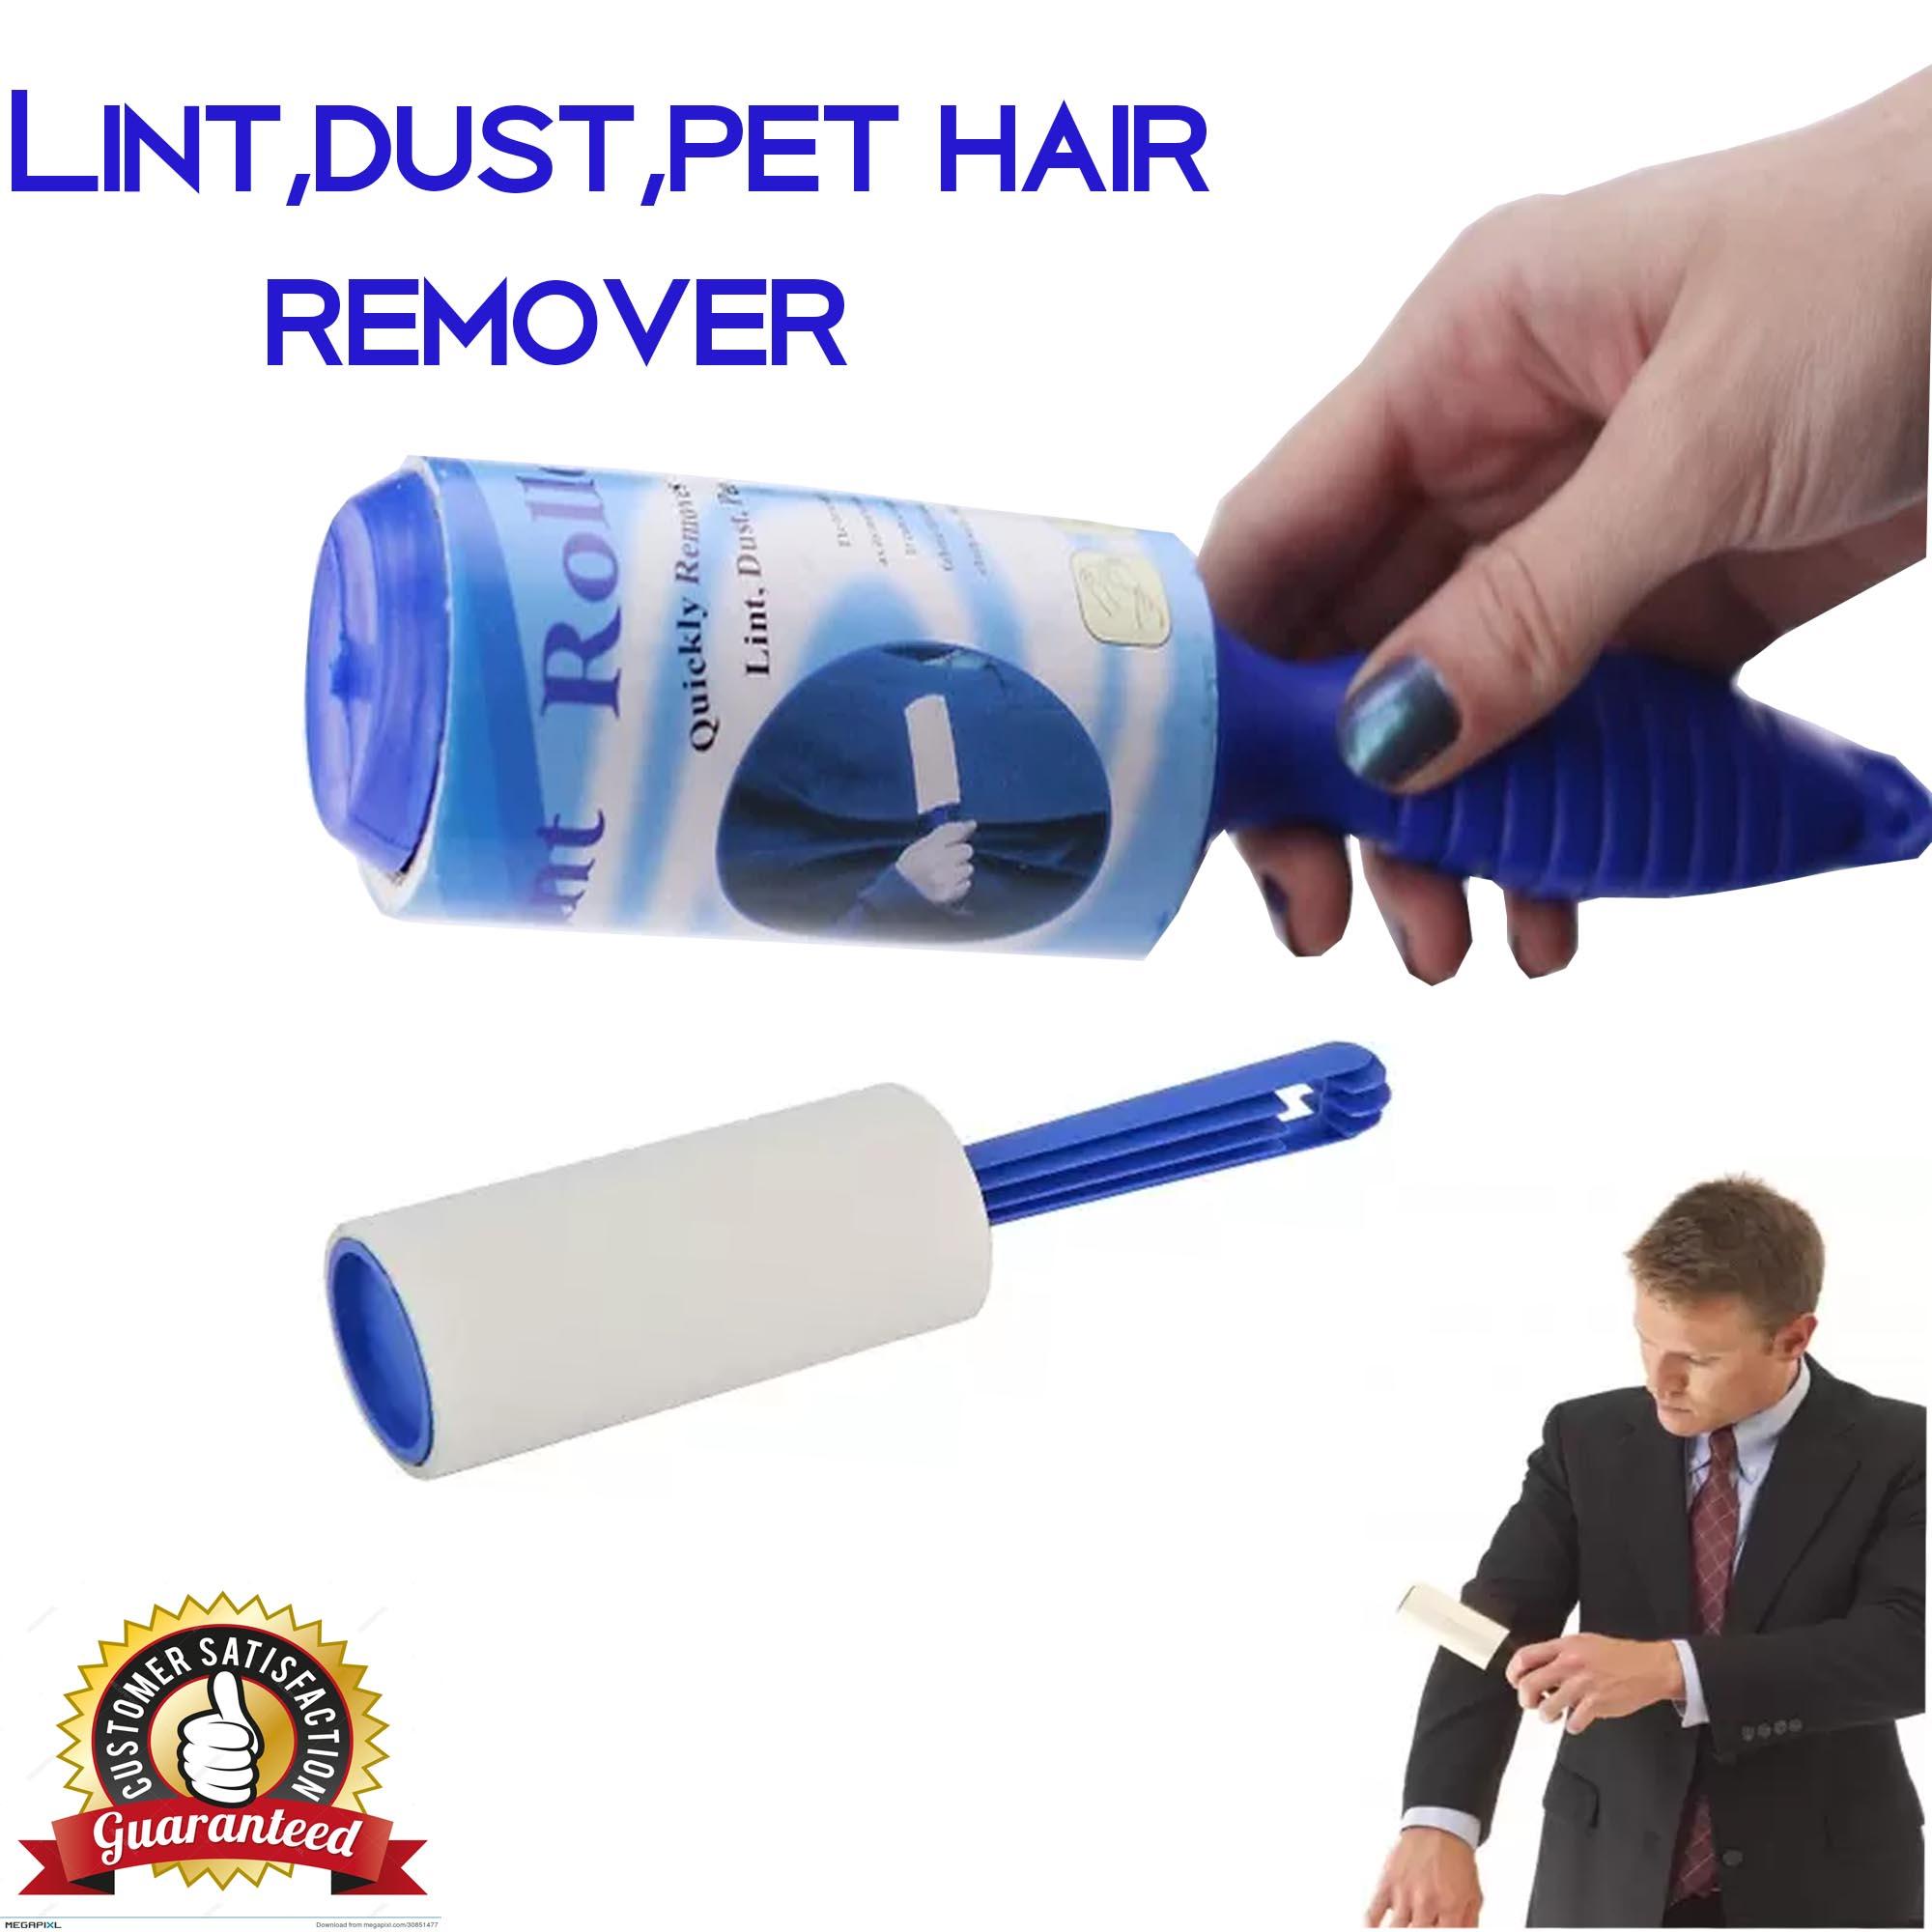 New Lint,Dust,Pet Hair and Dandruff Remover With 1 pieces Adhesive Rolls By  Marktony Direct Importer | Lazada PH